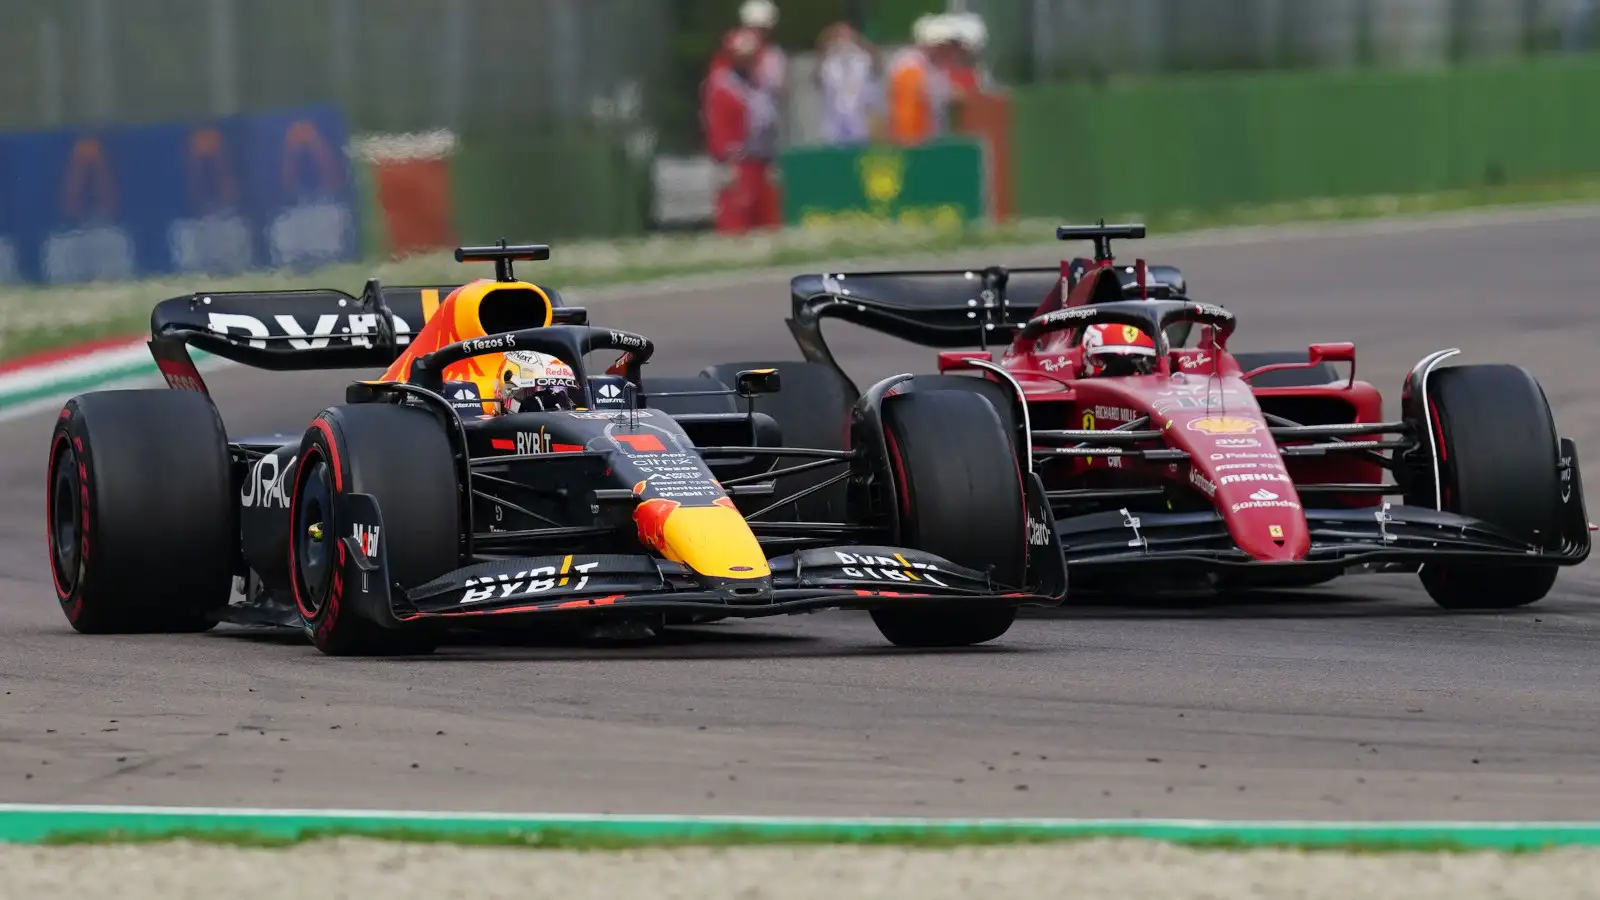 Max Verstappen pulling ahead of Charles Leclerc for the lead. Imola April 2022